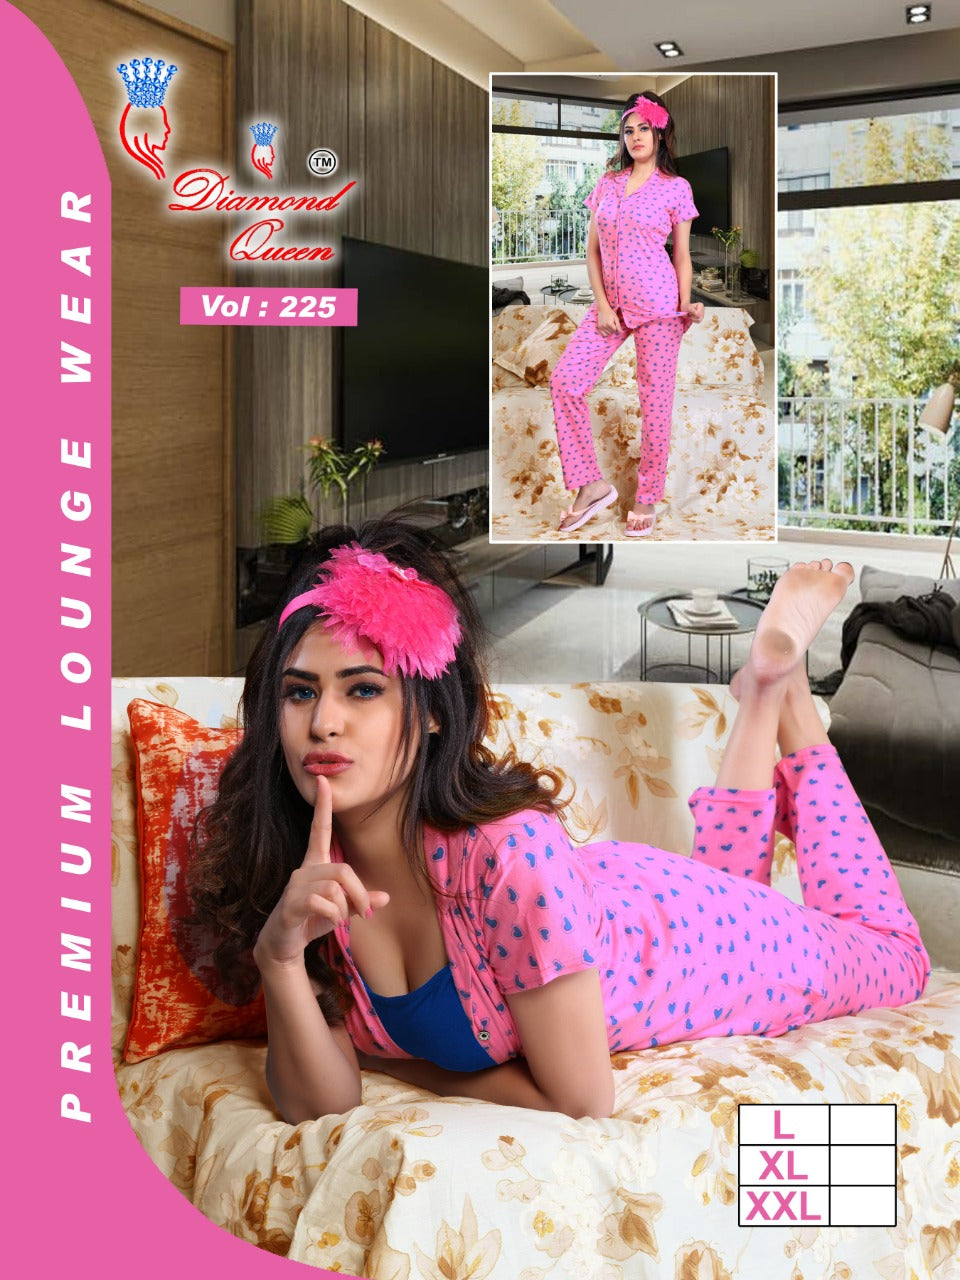 Ready At Store 225 Diamond Queen Hosiery Cotton Collar Night Suits